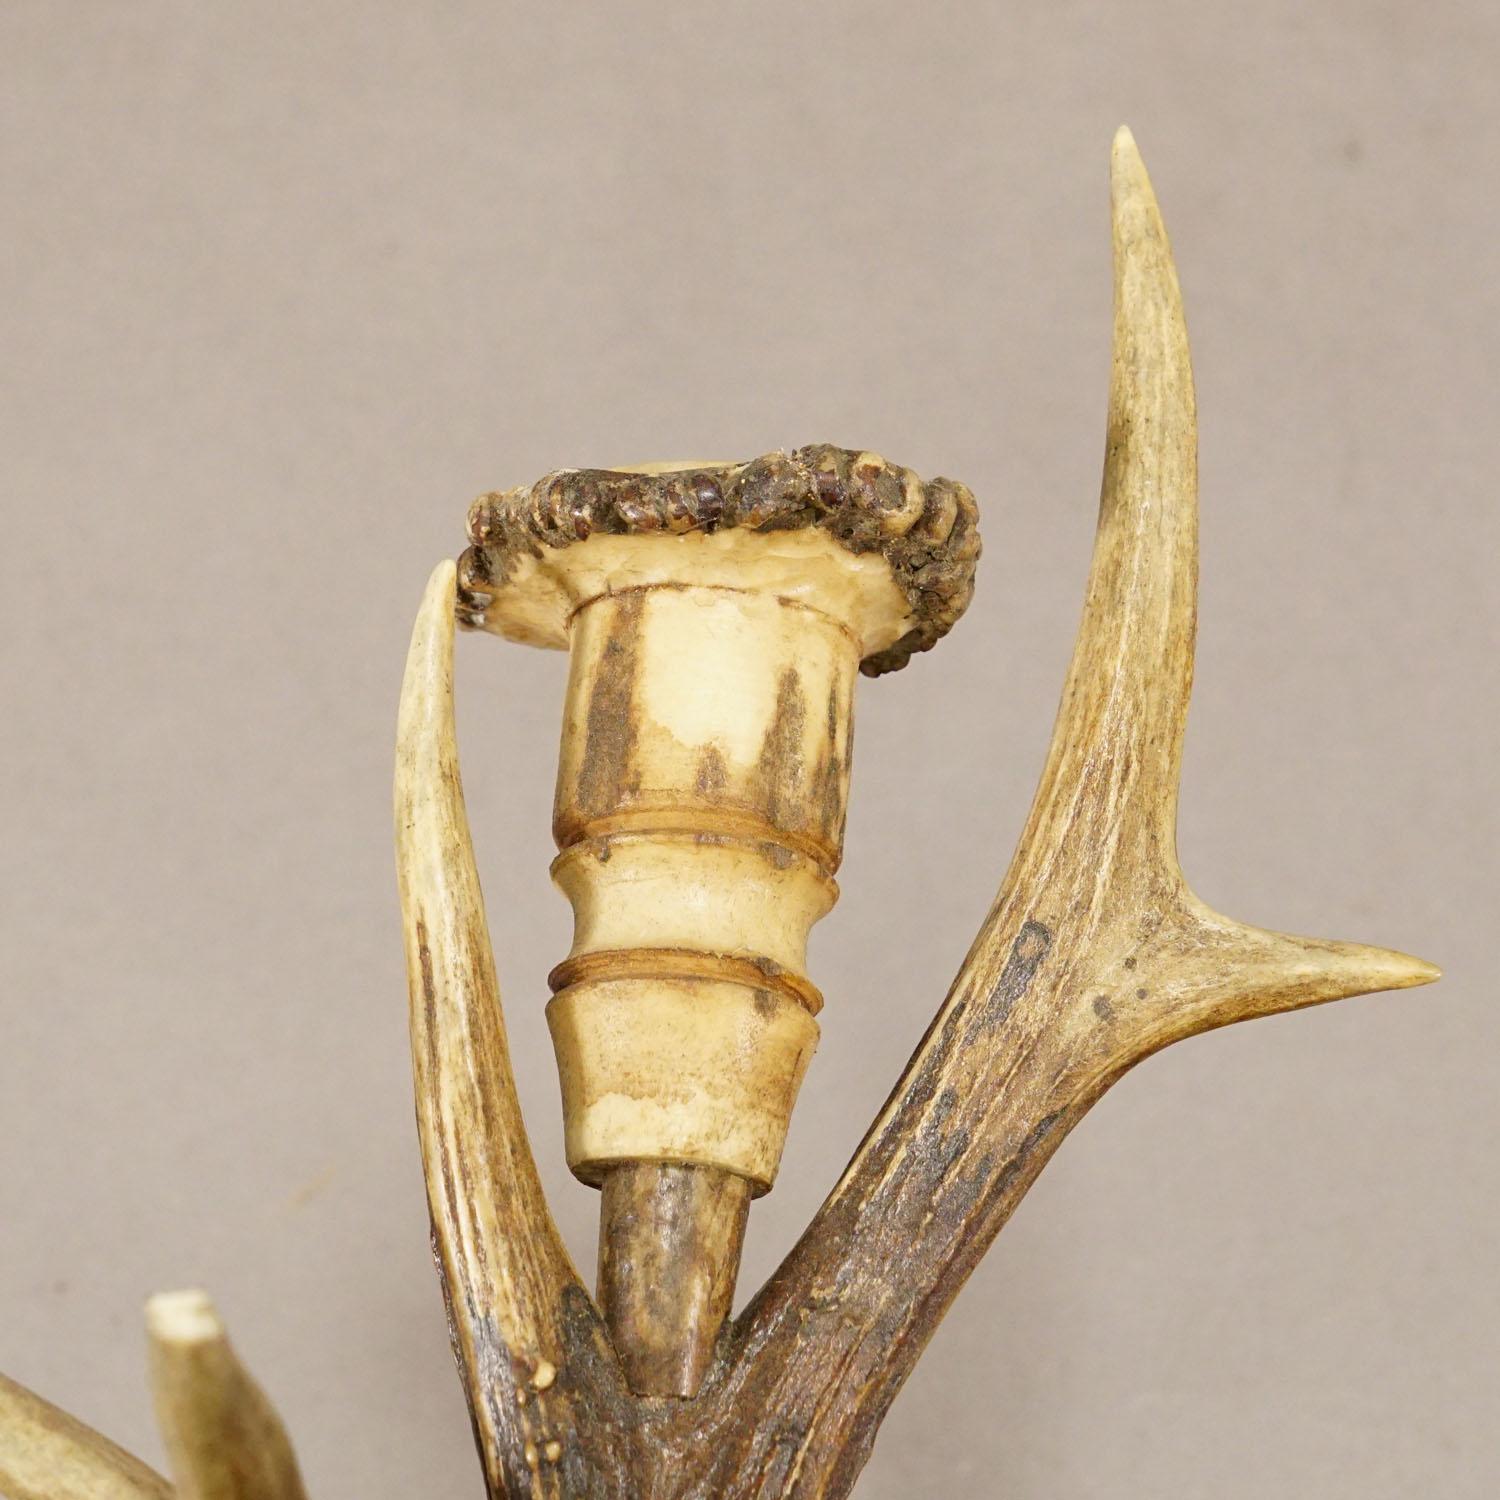 20th Century Pair Black Forest Wall Sconces with Deer Antlers, Germany circa 1900